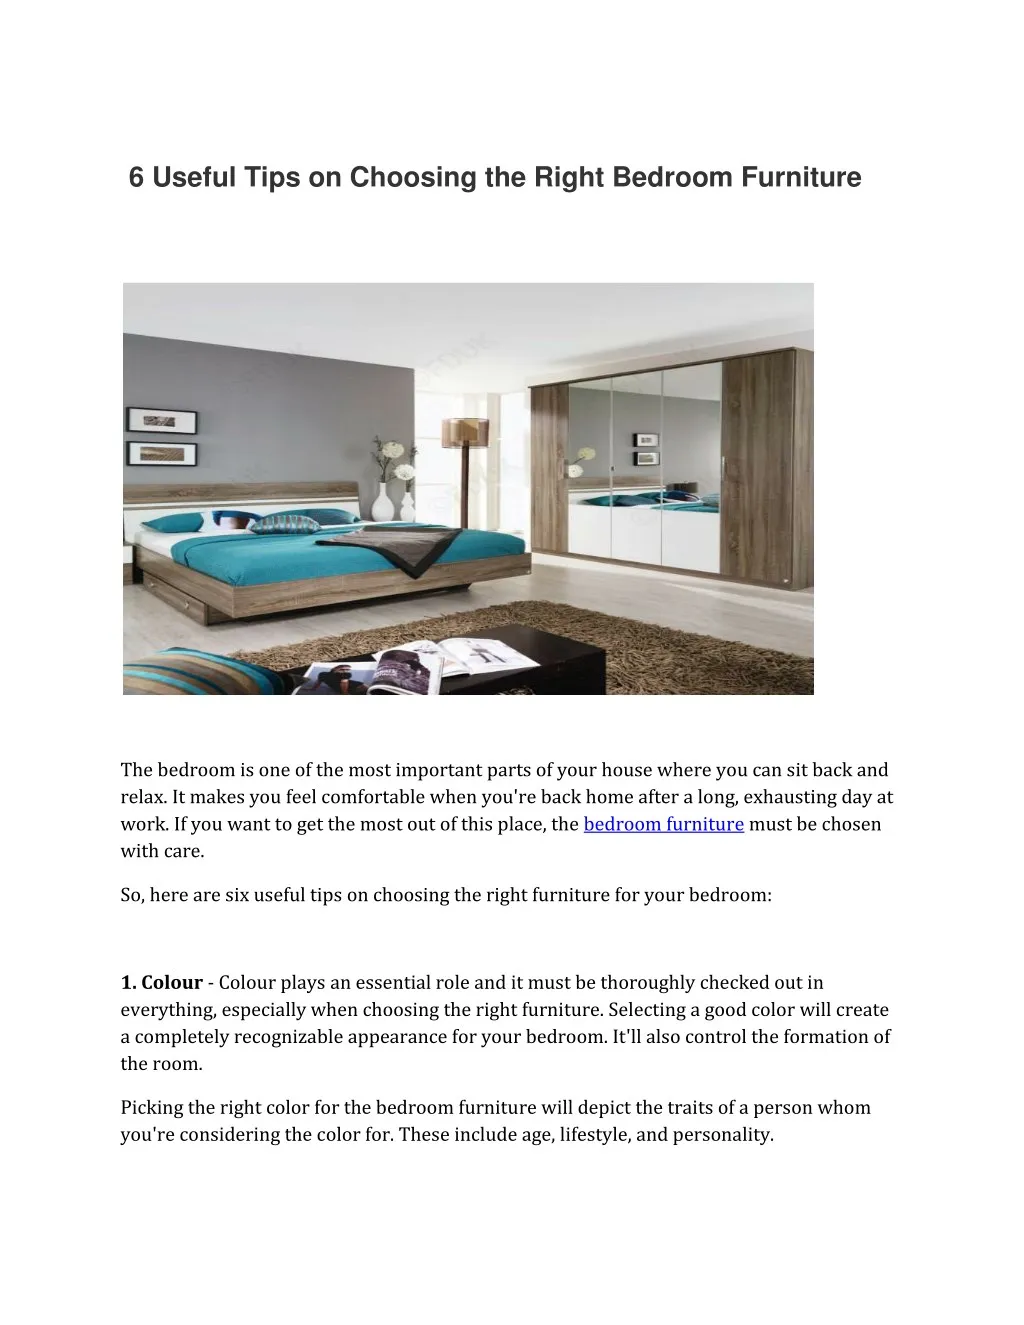 6 useful tips on choosing the right bedroom